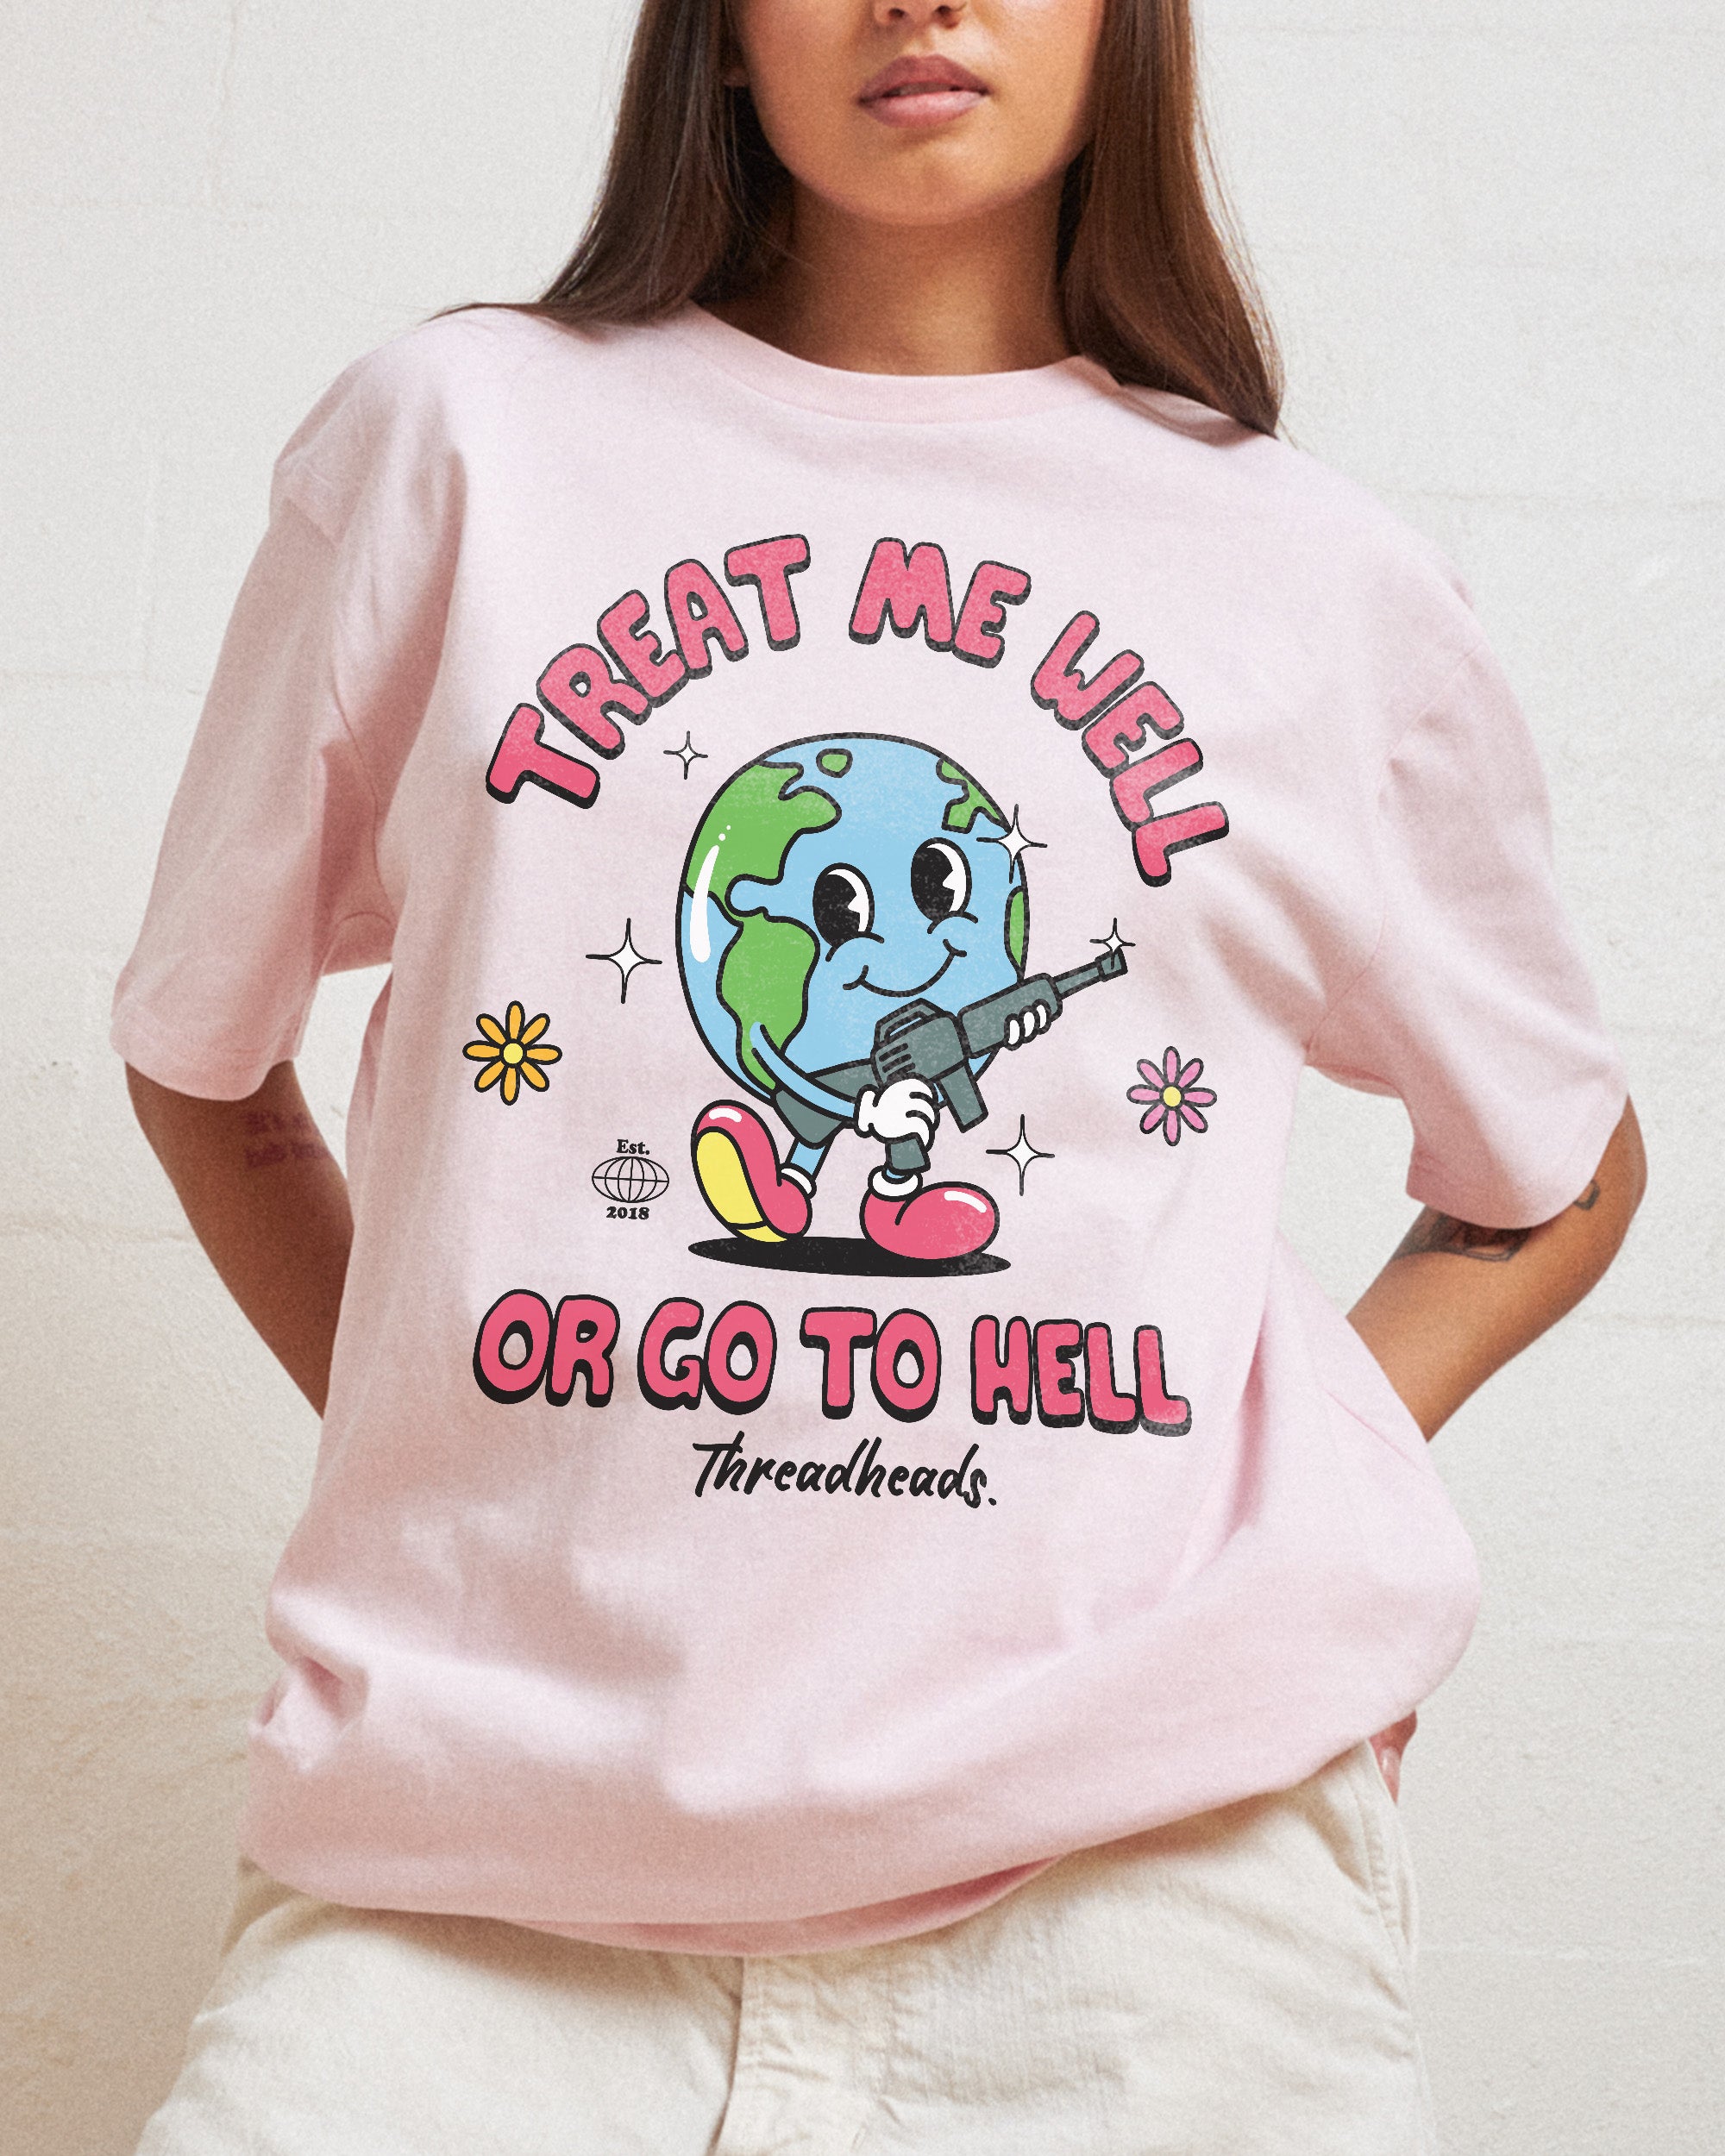 Treat Me Well Or Go To Hell T-Shirt